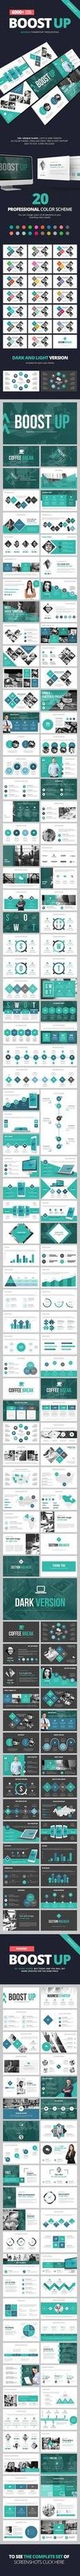 Boost Up  Business Powerpoint Template